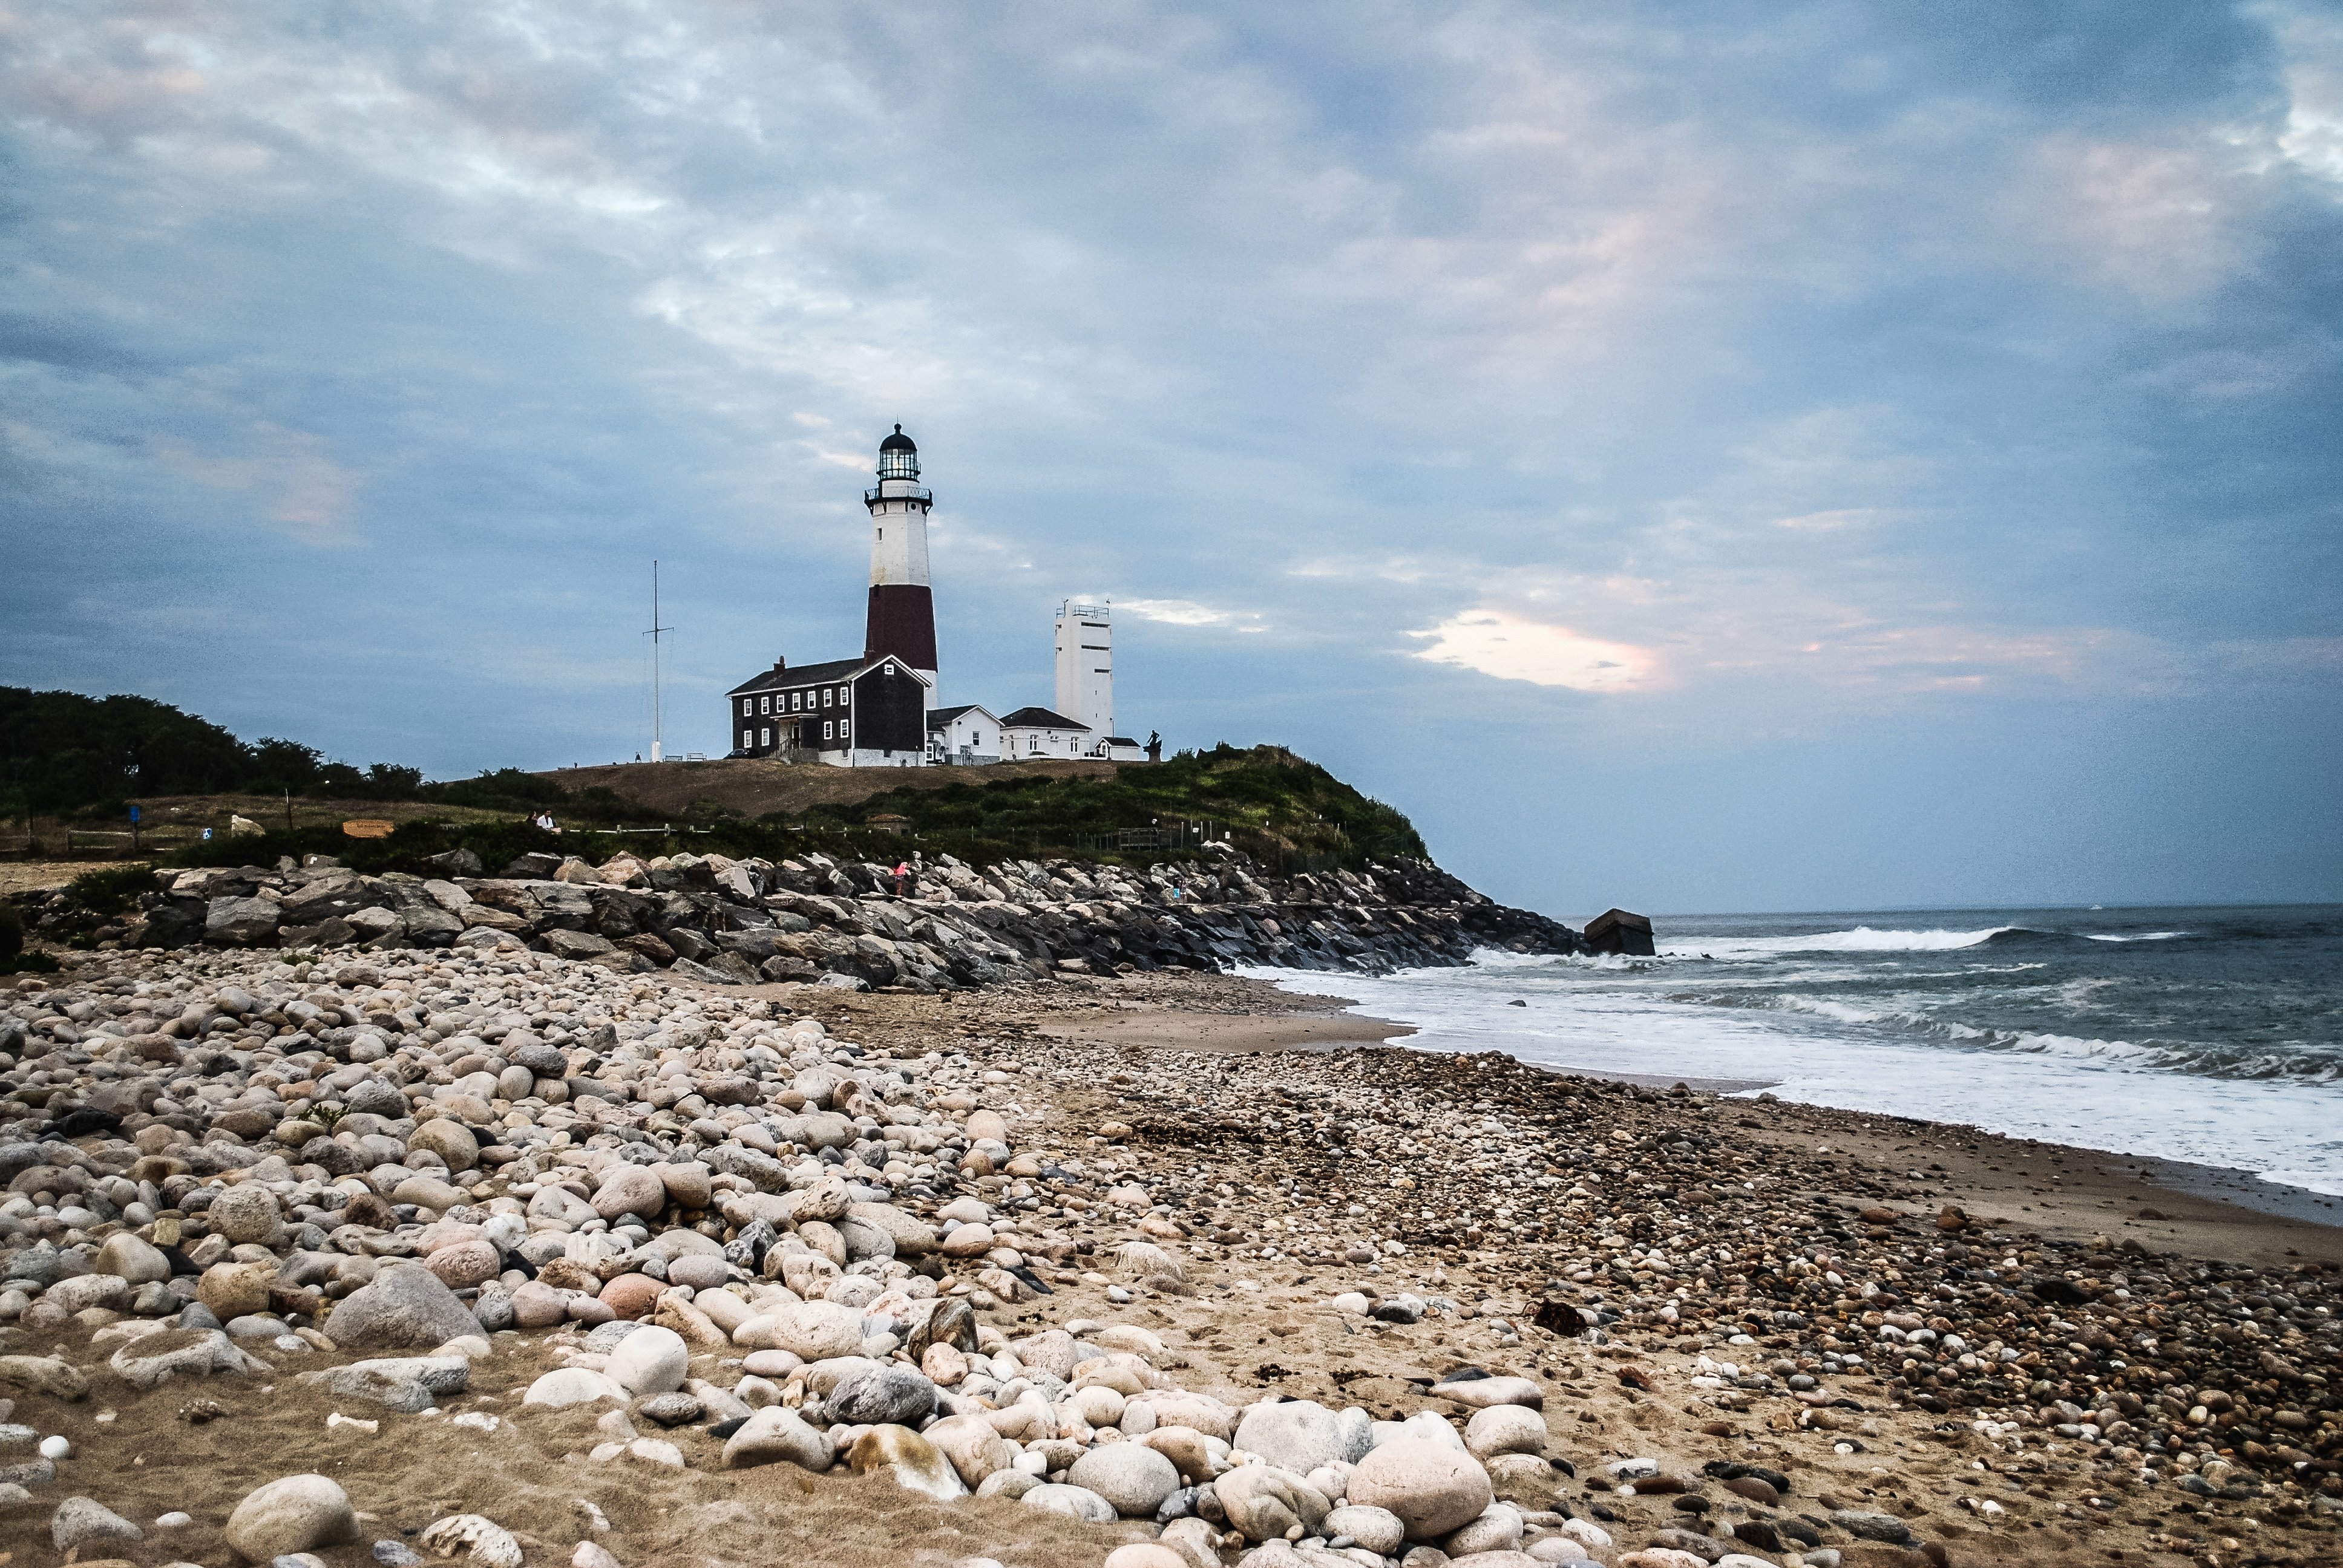 Lifestyle Blogger Chocolate and Lace shares her family photo Diary of Montauk, NY. 